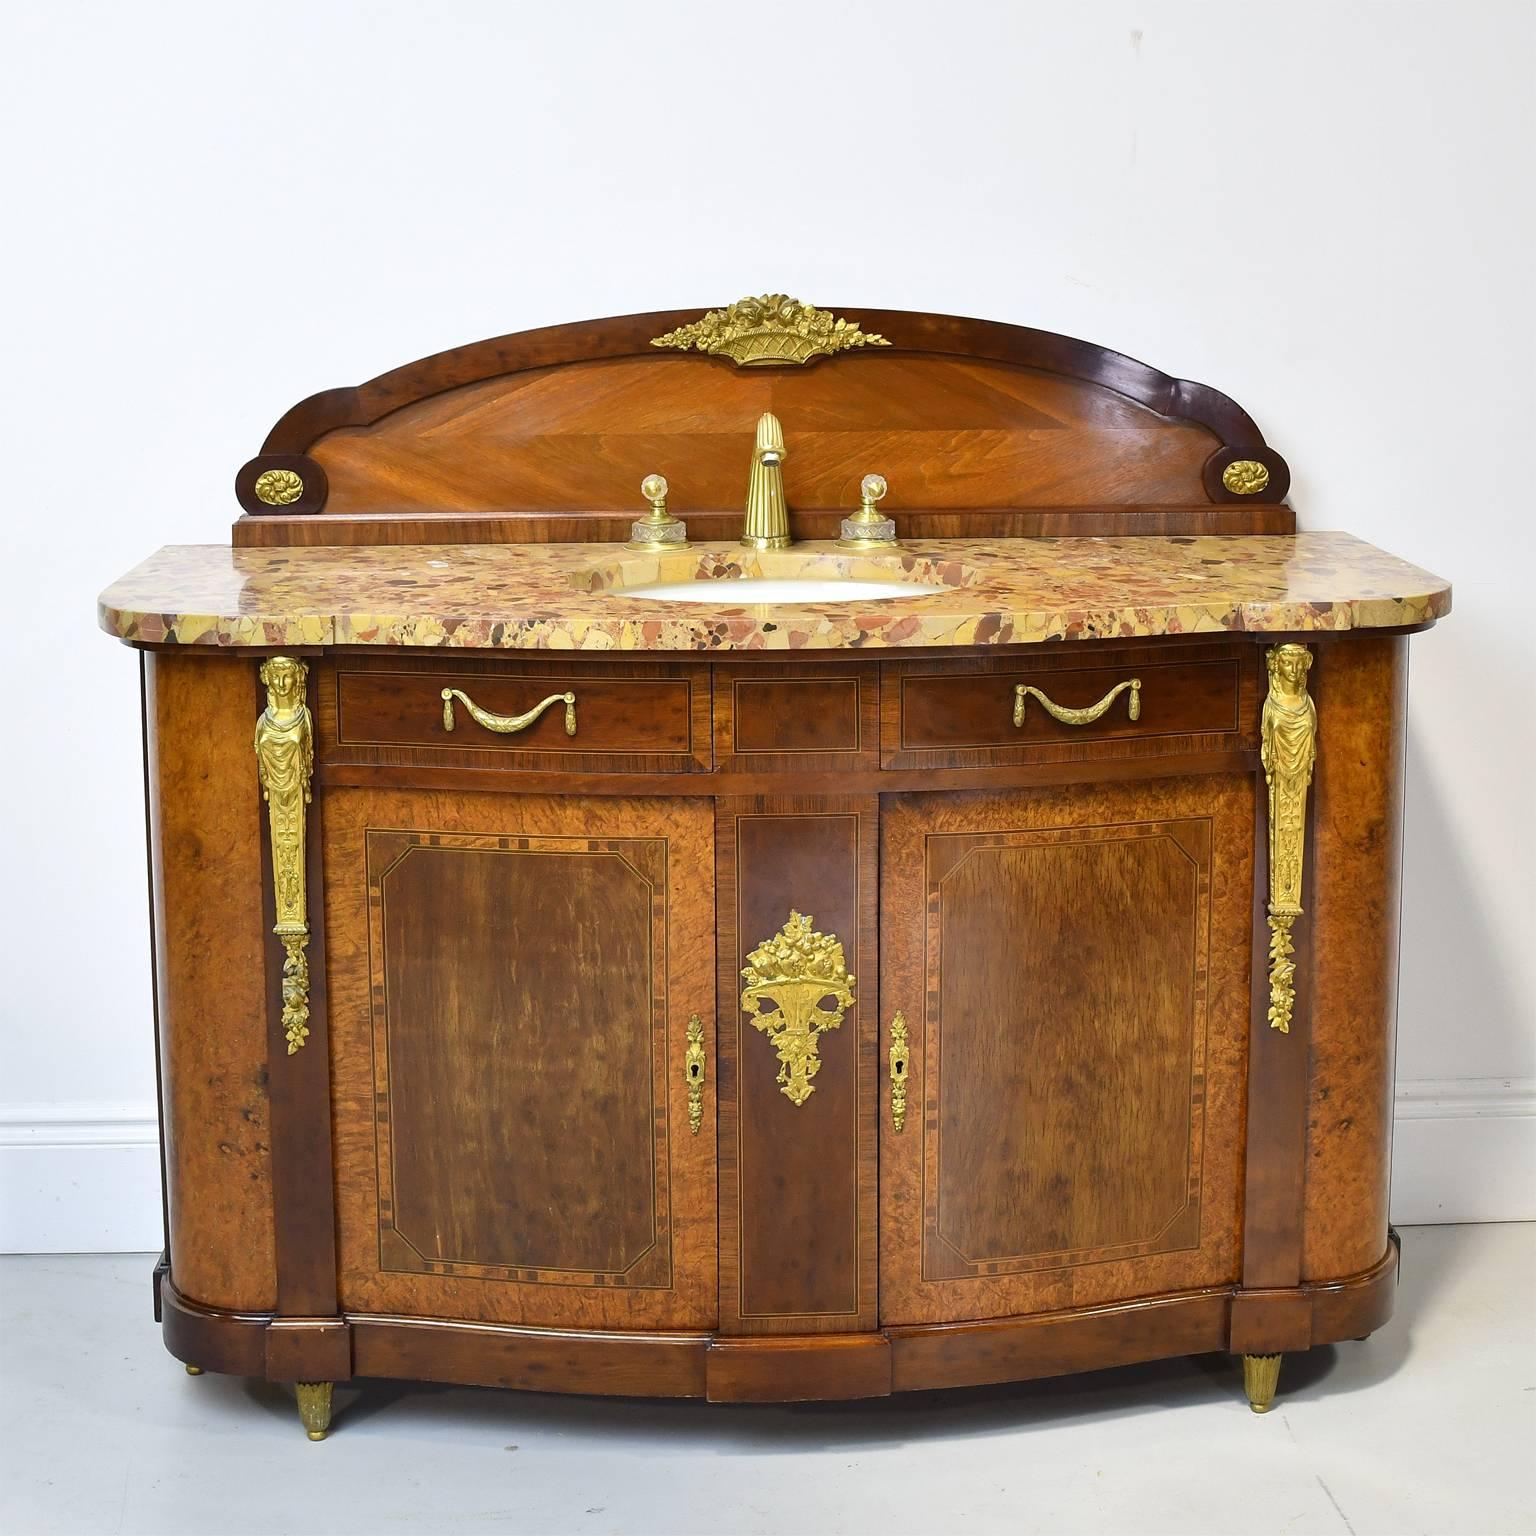 An extremely beautiful and well-crafted pair of sideboard cabinets converted for use as bathroom vanities with oval under-mount Kohler sinks and crystal-handled faucets dropped into original marble tops. From pre WWI France, these cabinets have a